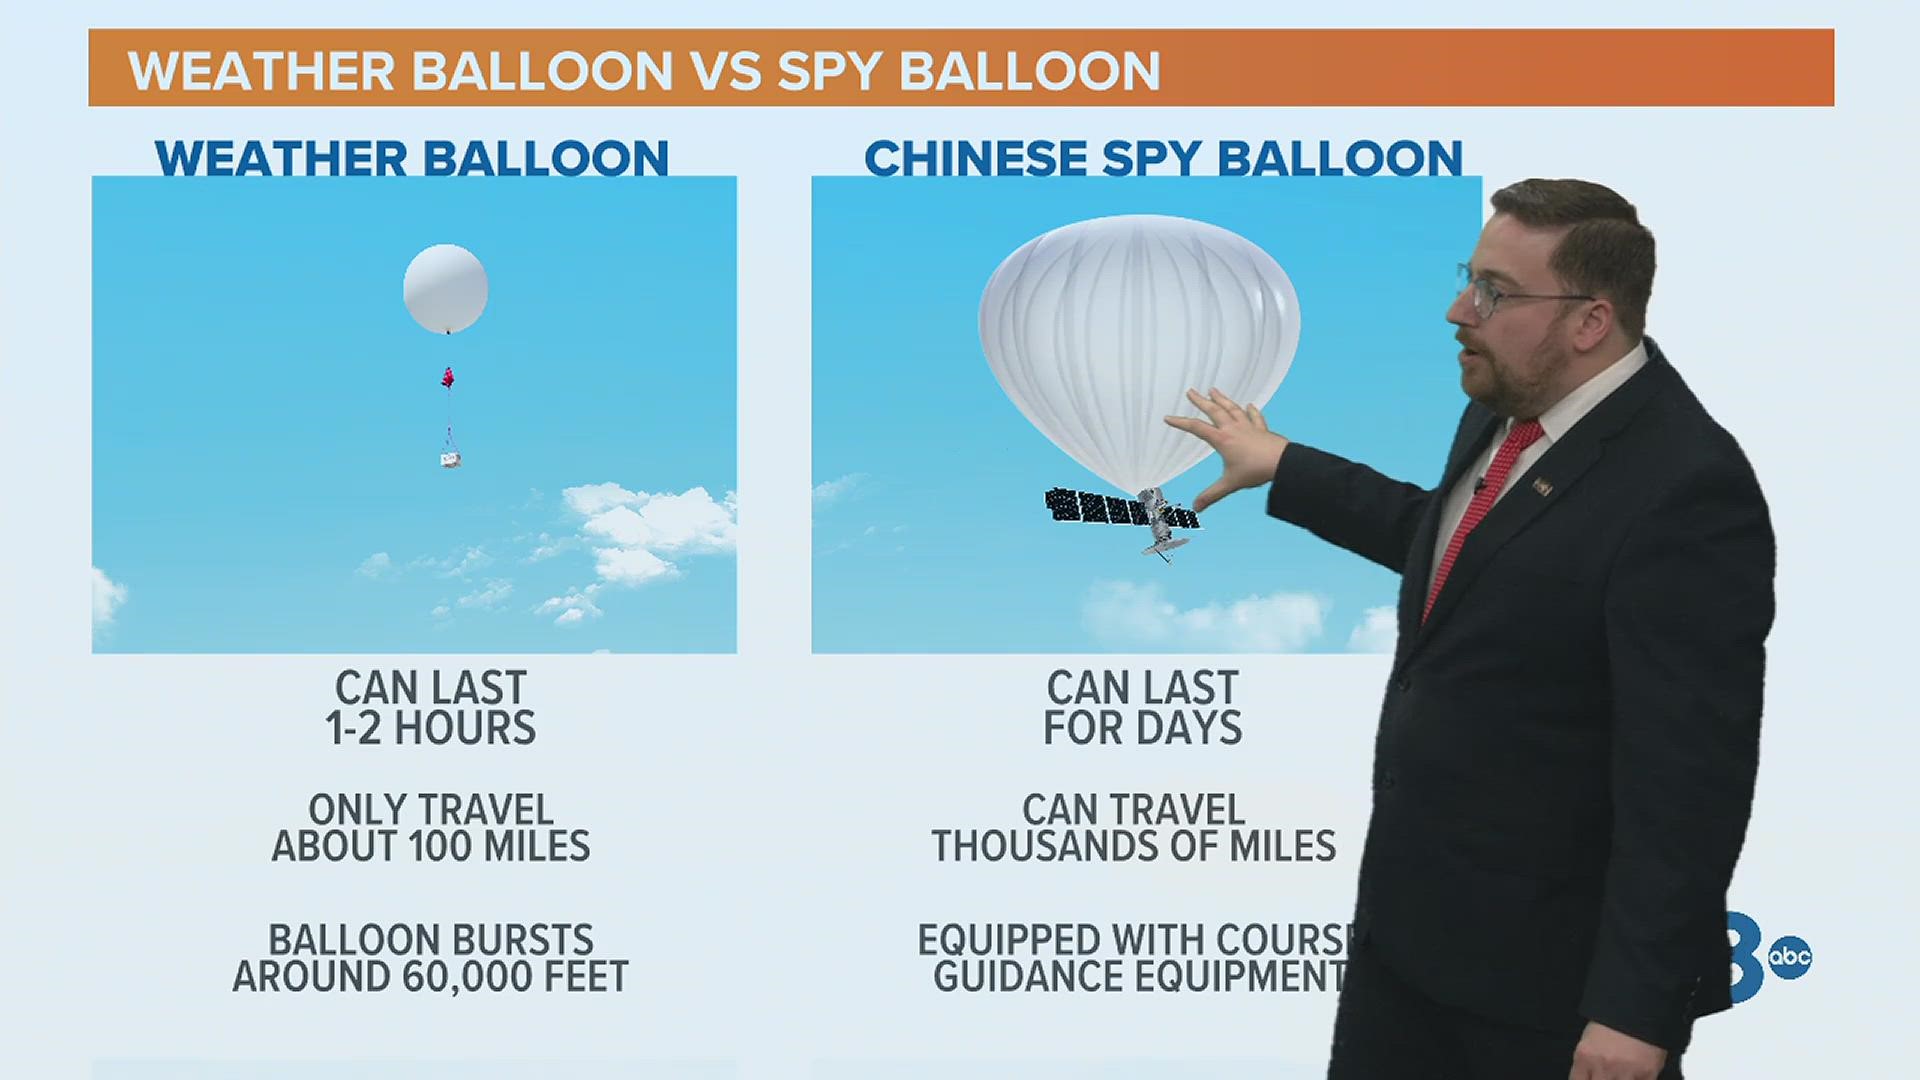 Weather balloons are vastly different in both their purpose and lifespan when compared to a spy balloon.